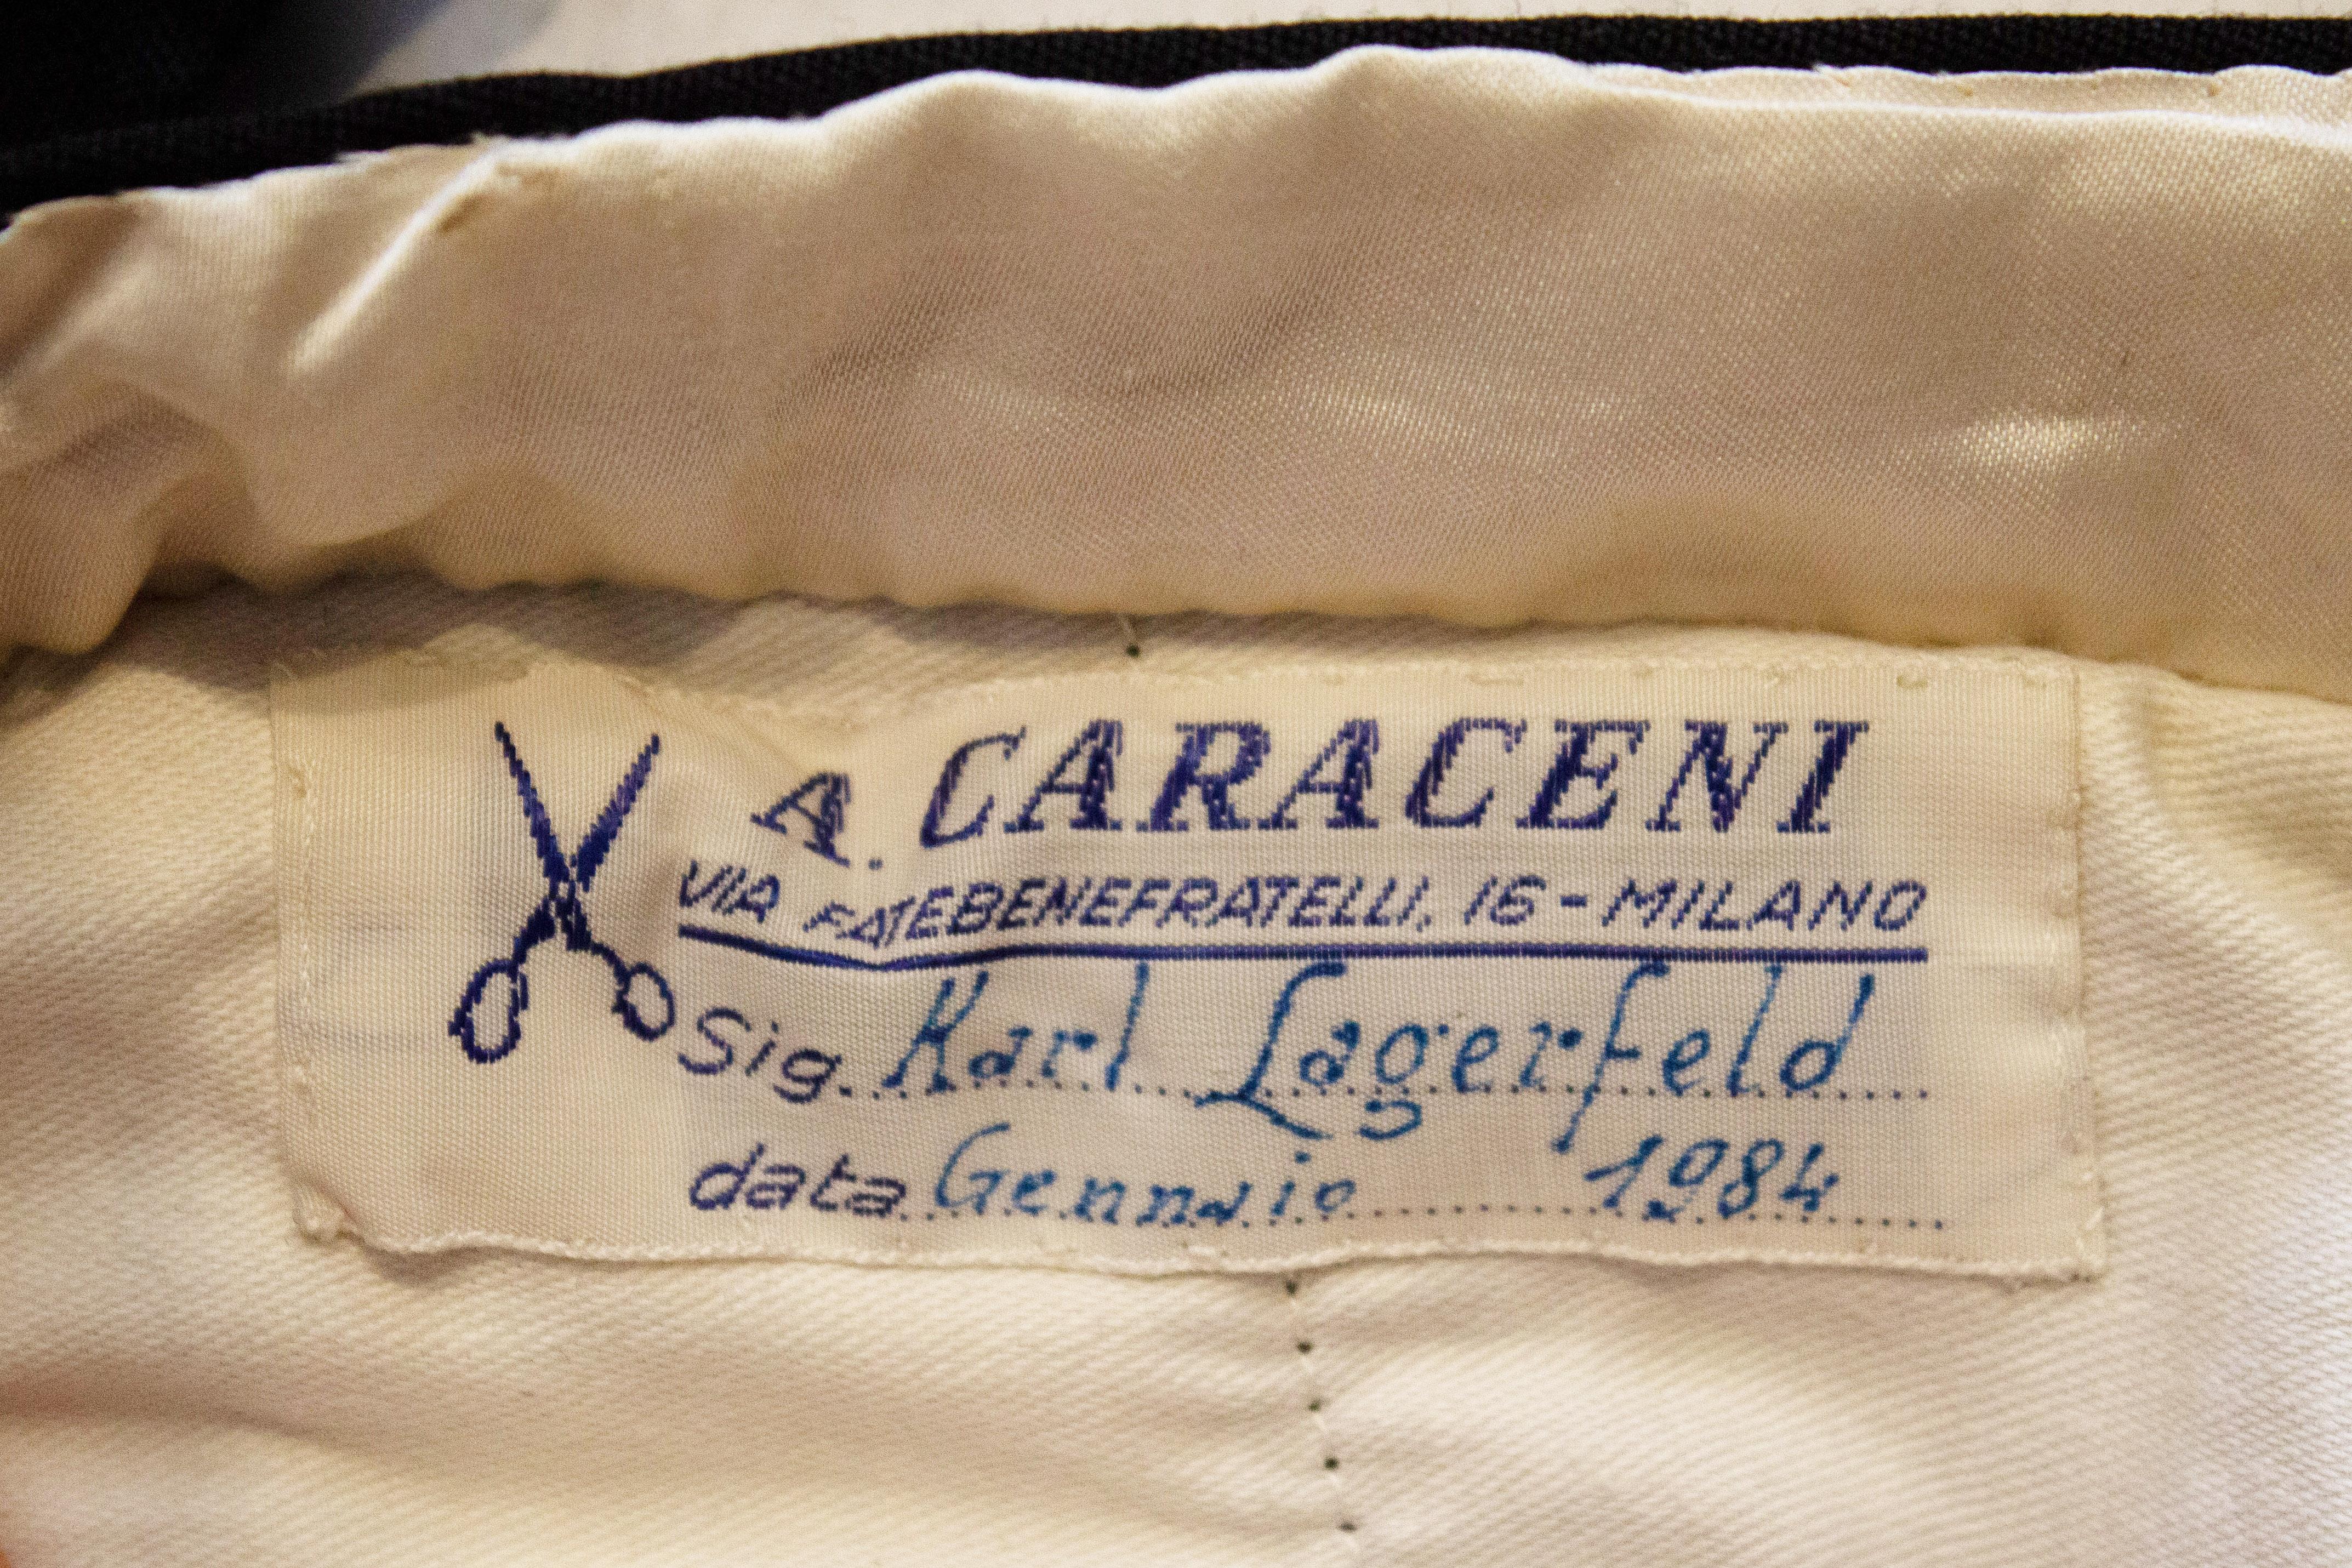 A rare and beautifully made pair of black trousers by A Caraceni, Milan, . These were made for Karl Lagerfeld in 1984.  They have a button fly opening, with two back pockets and one pocket on each side. There is a black ribbon along each out side